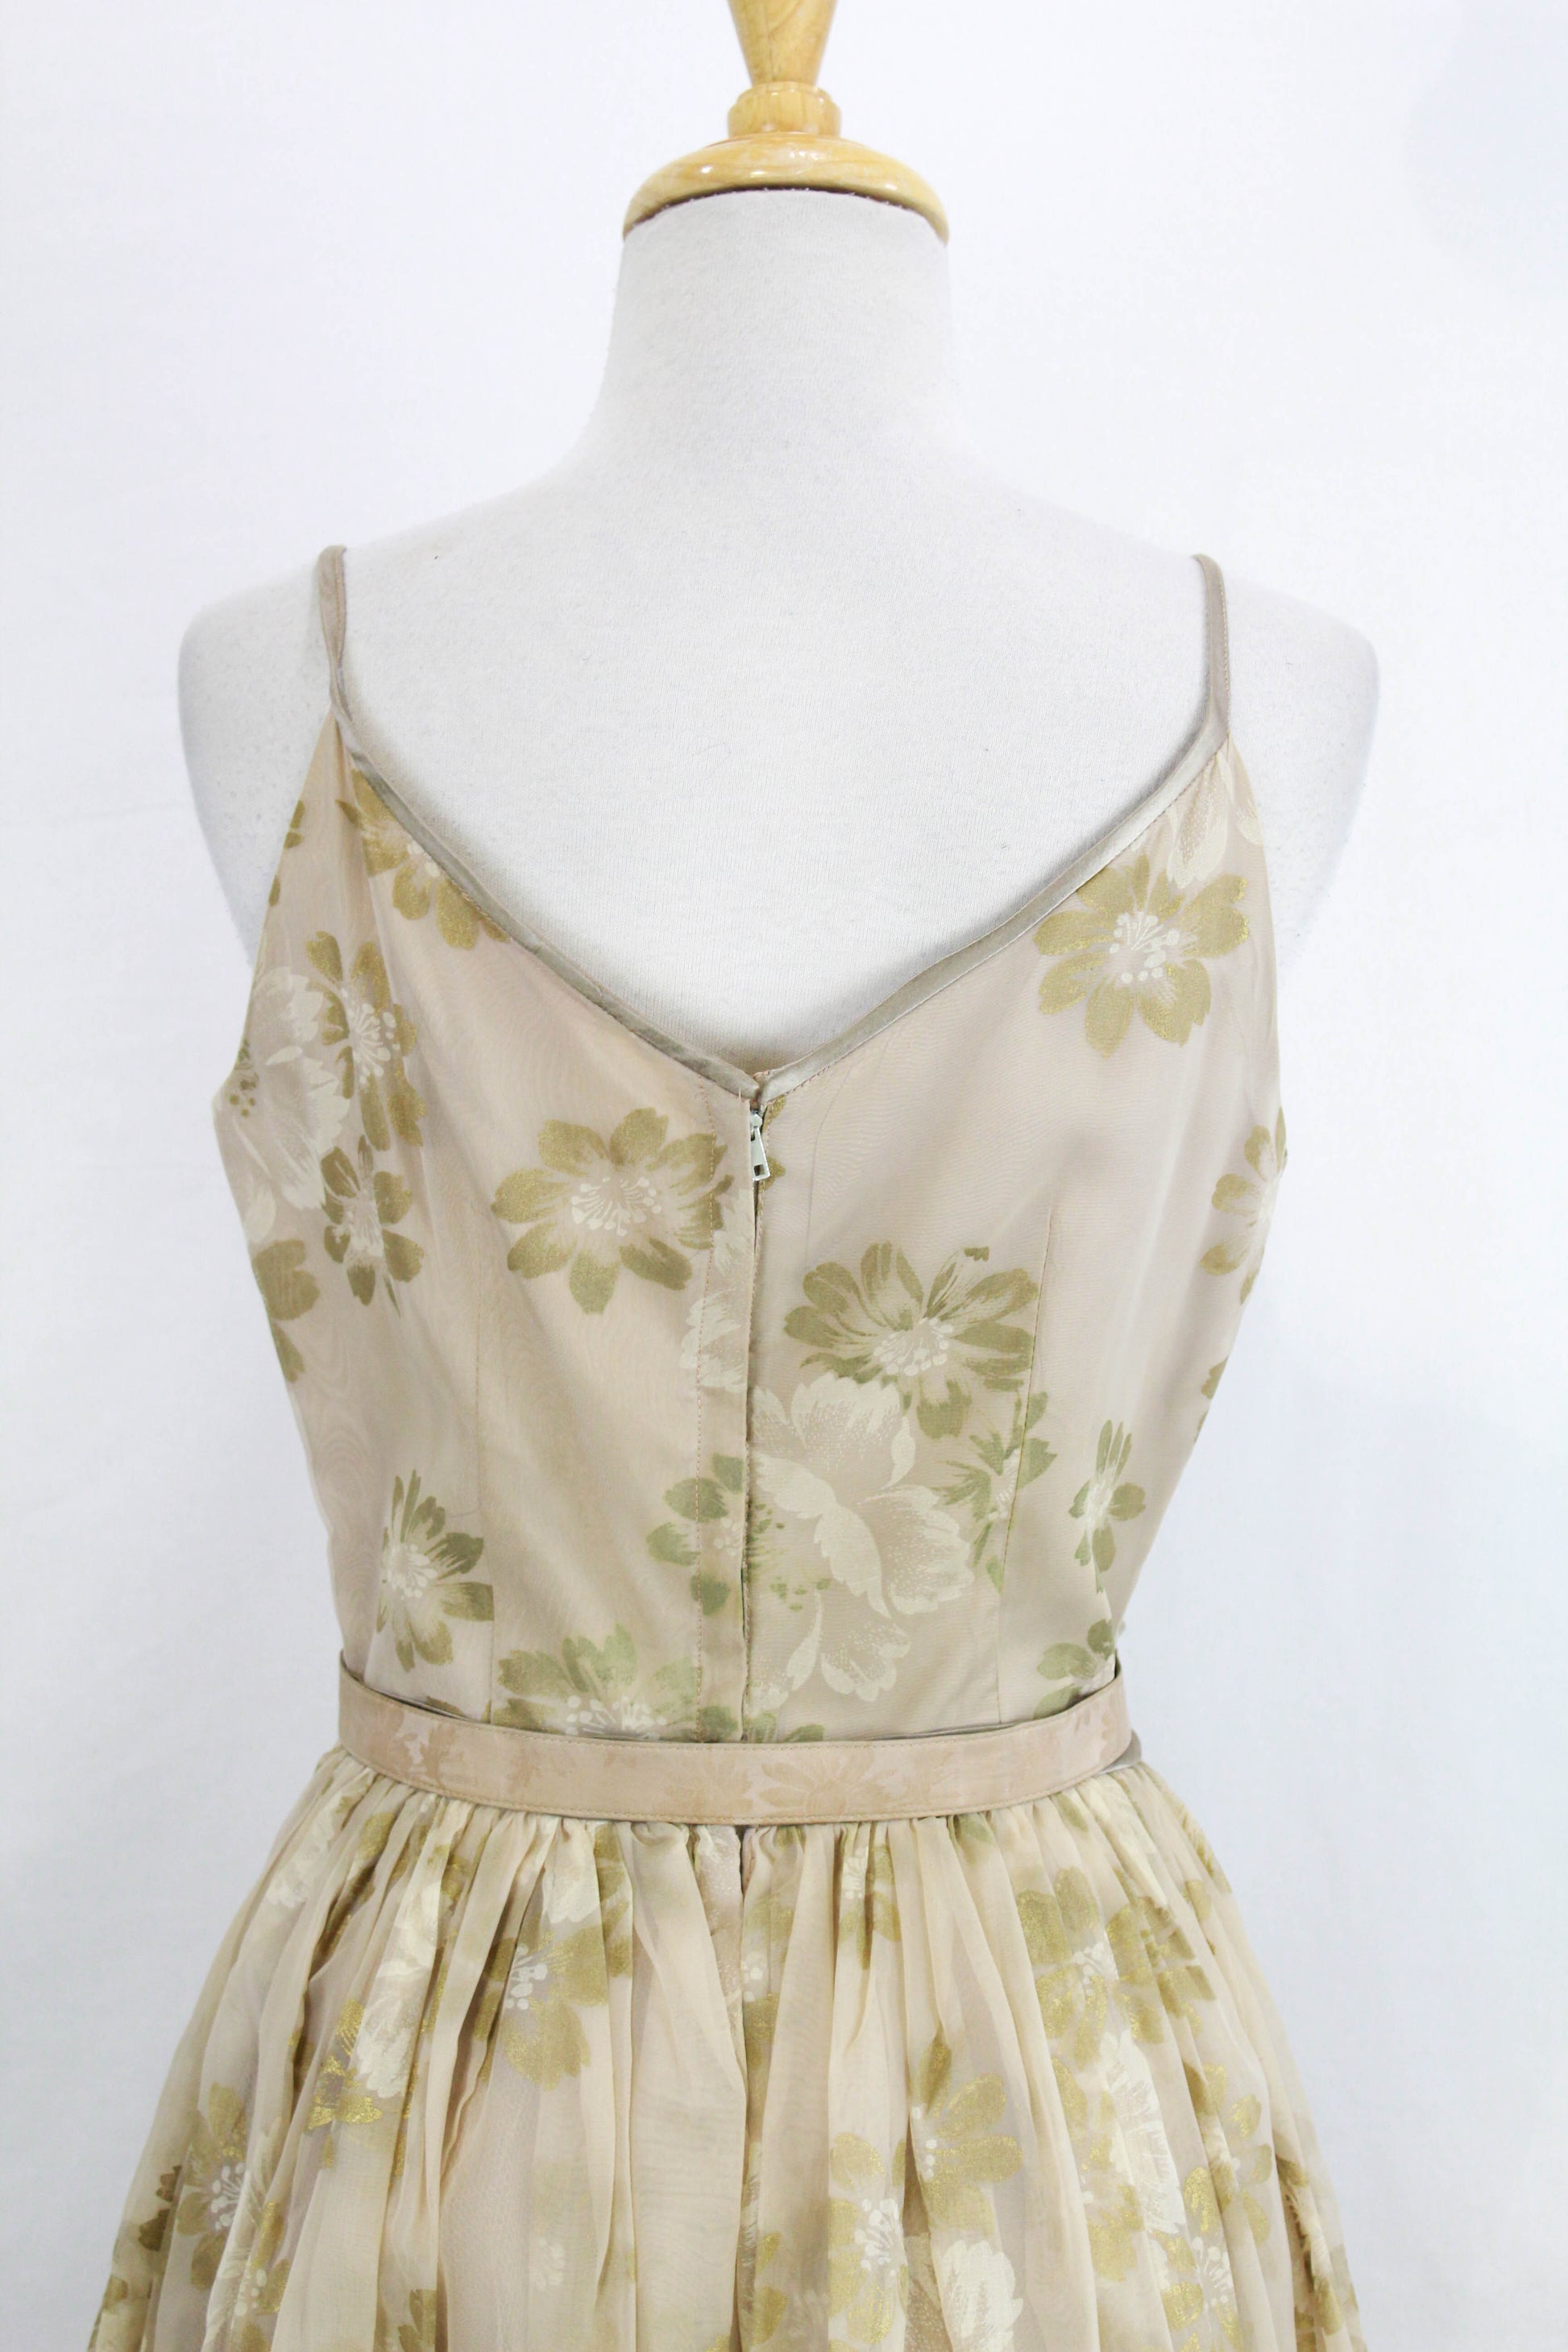  1950s Taupe Floral Print Chiffon Party Dress, Full Skirt Gathered with Matching Belt, Spaghetti Straps, Vintage 50s Womens Fit and Flare, True Vintage, Ian Drummond Vintage